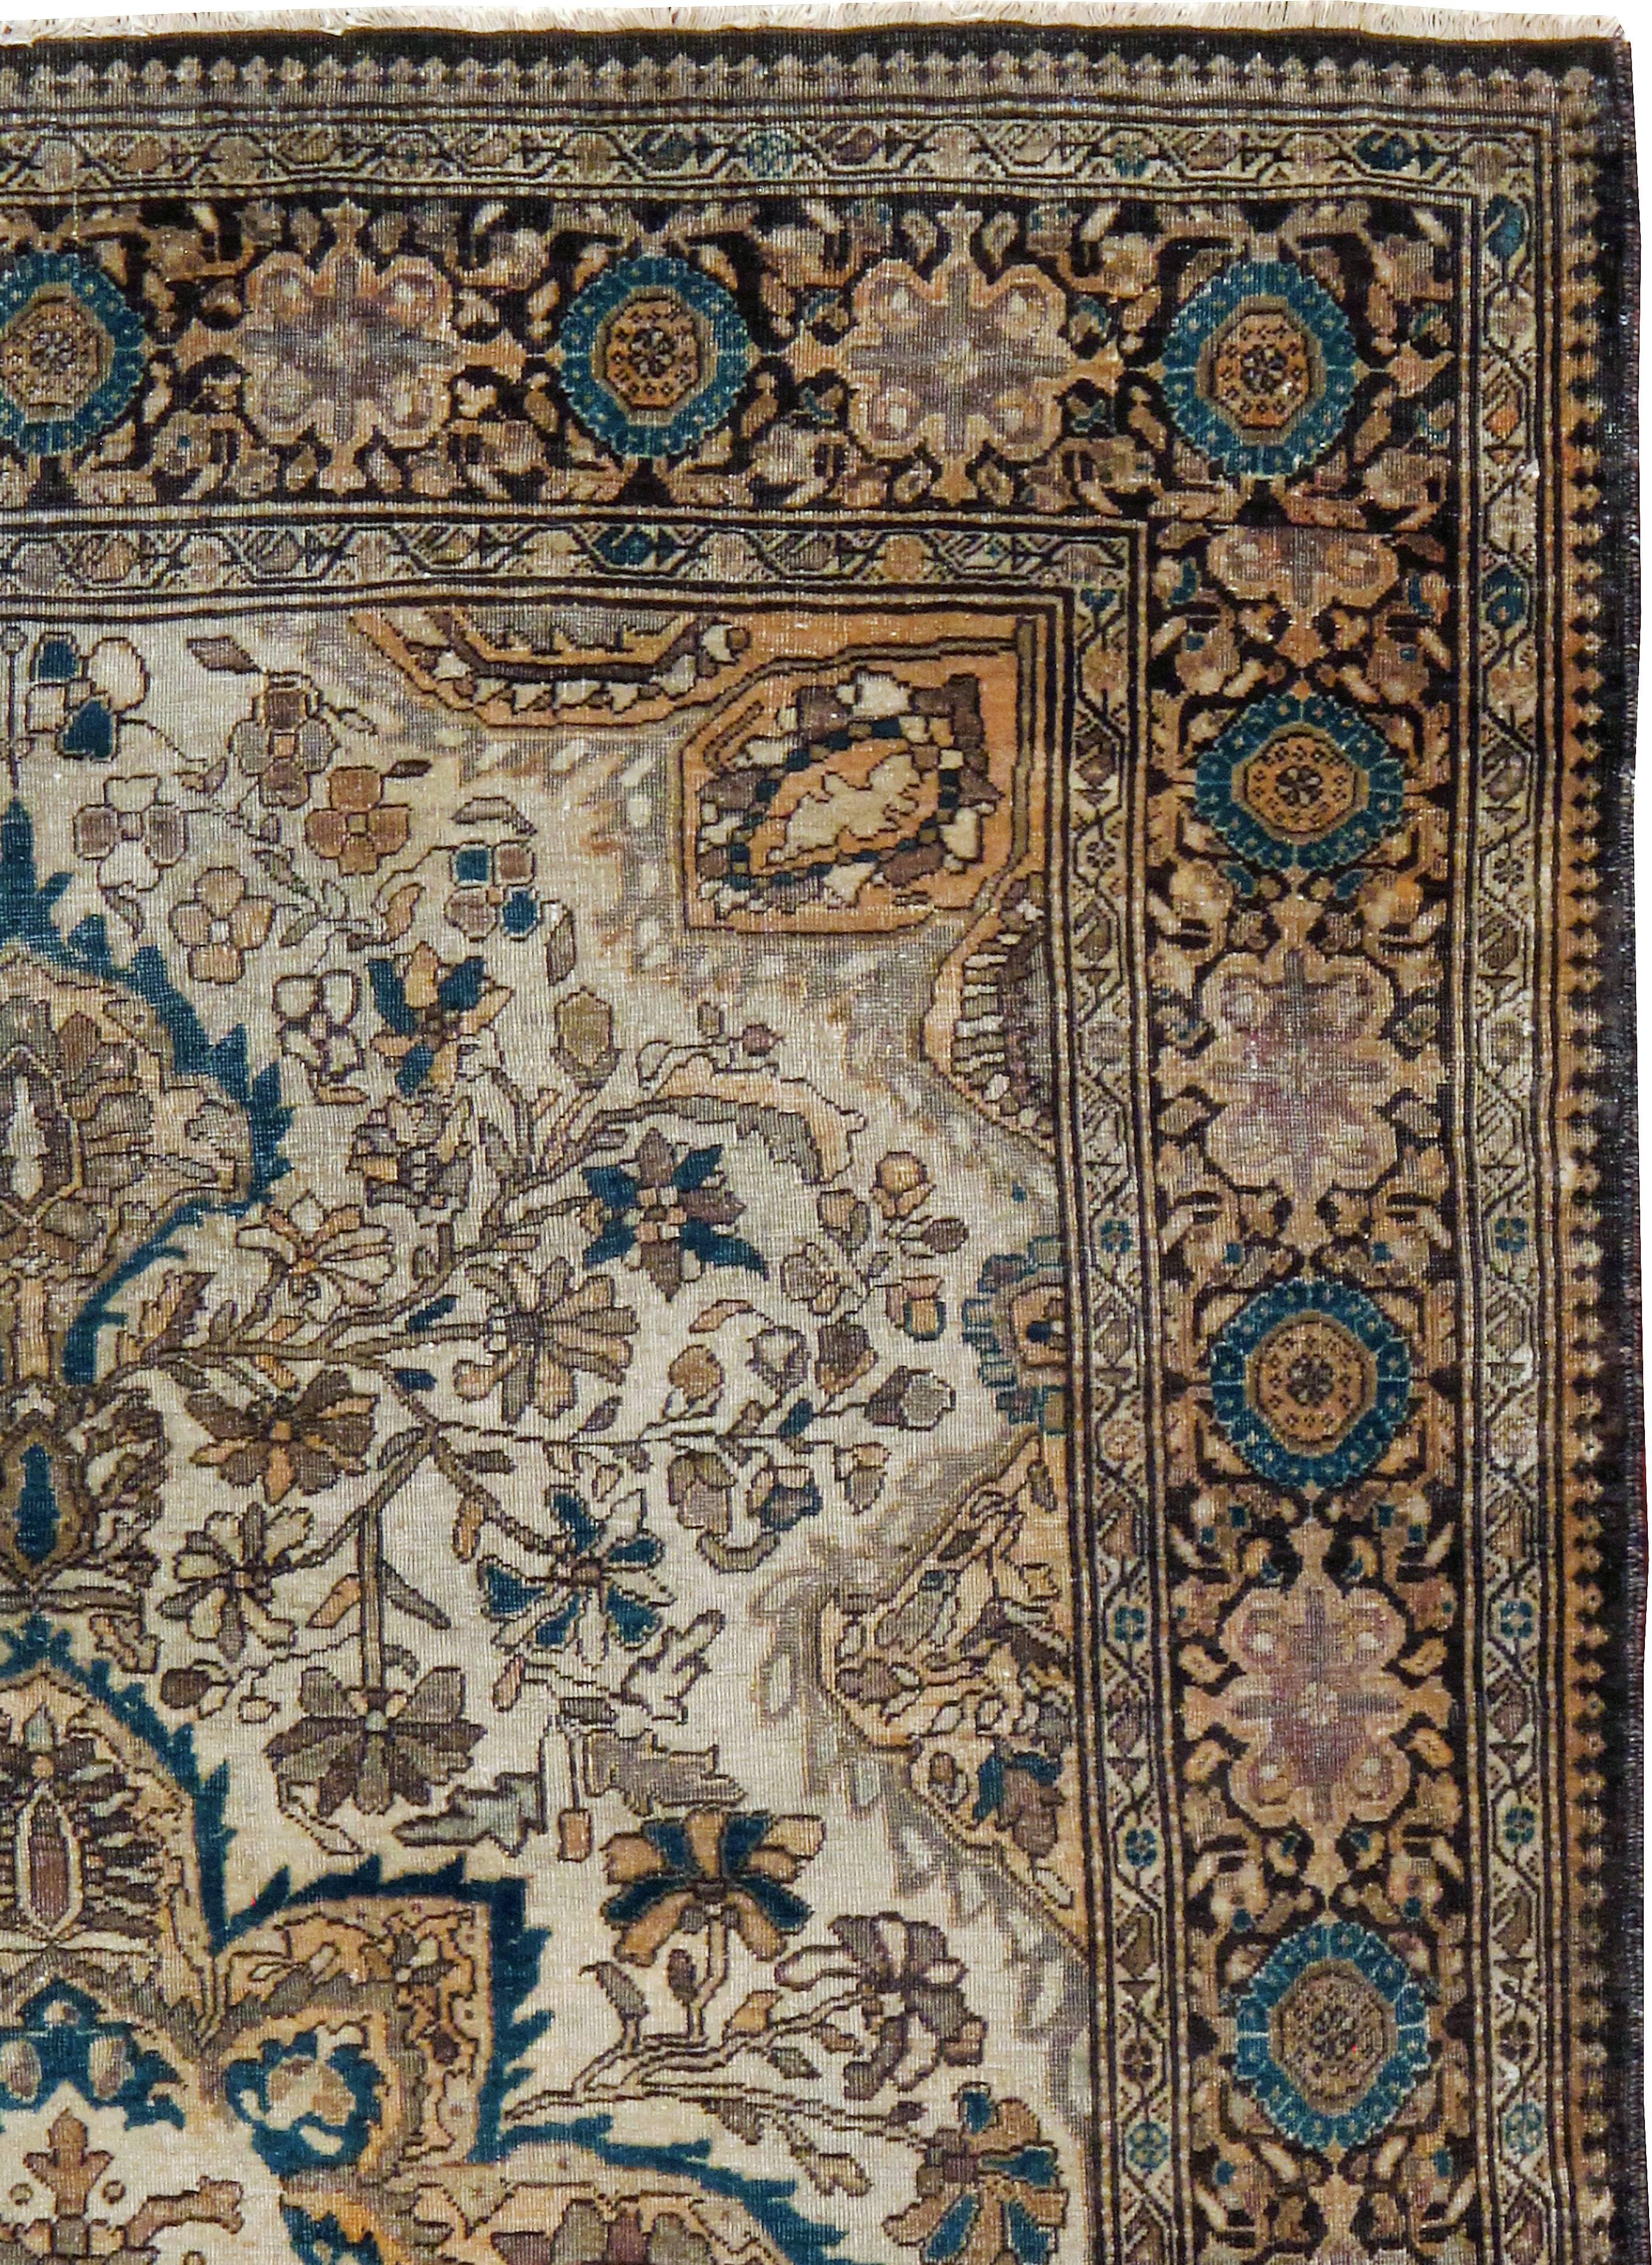 An antique Persian Sarouk Farahan carpet from the mid-20th century.